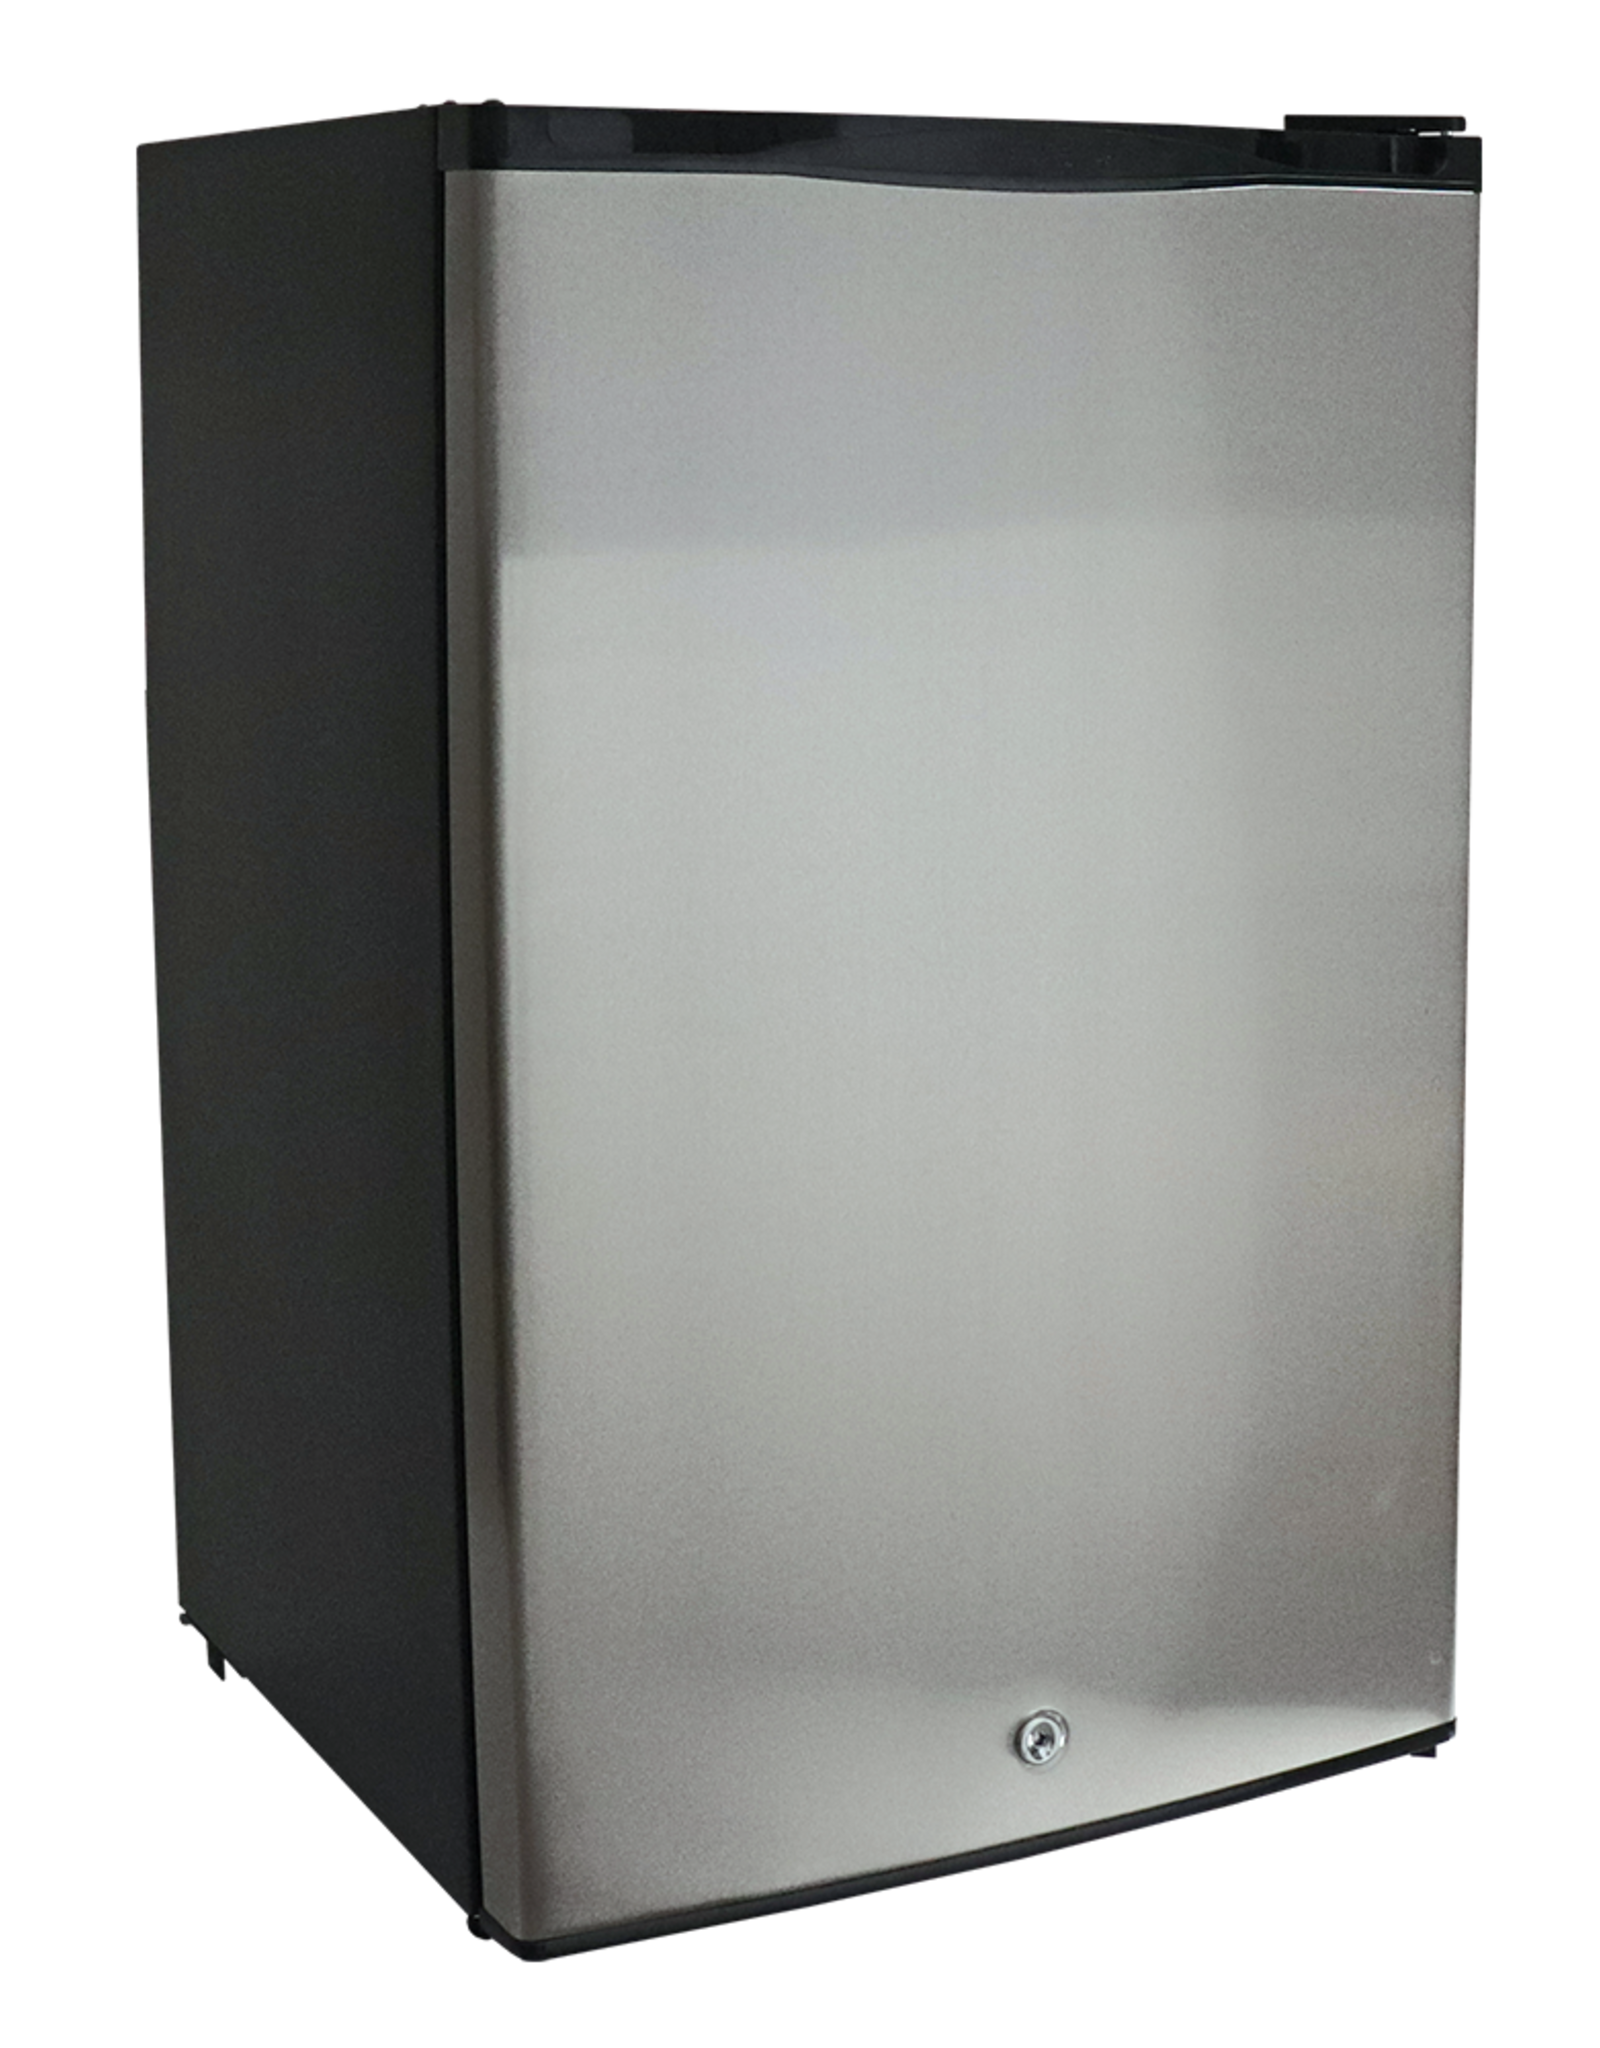 Renaissance Cooking Systems Renaissance Cooking Systems Refrigerator - 304 SS Reversible Door with Lock - REFR1A